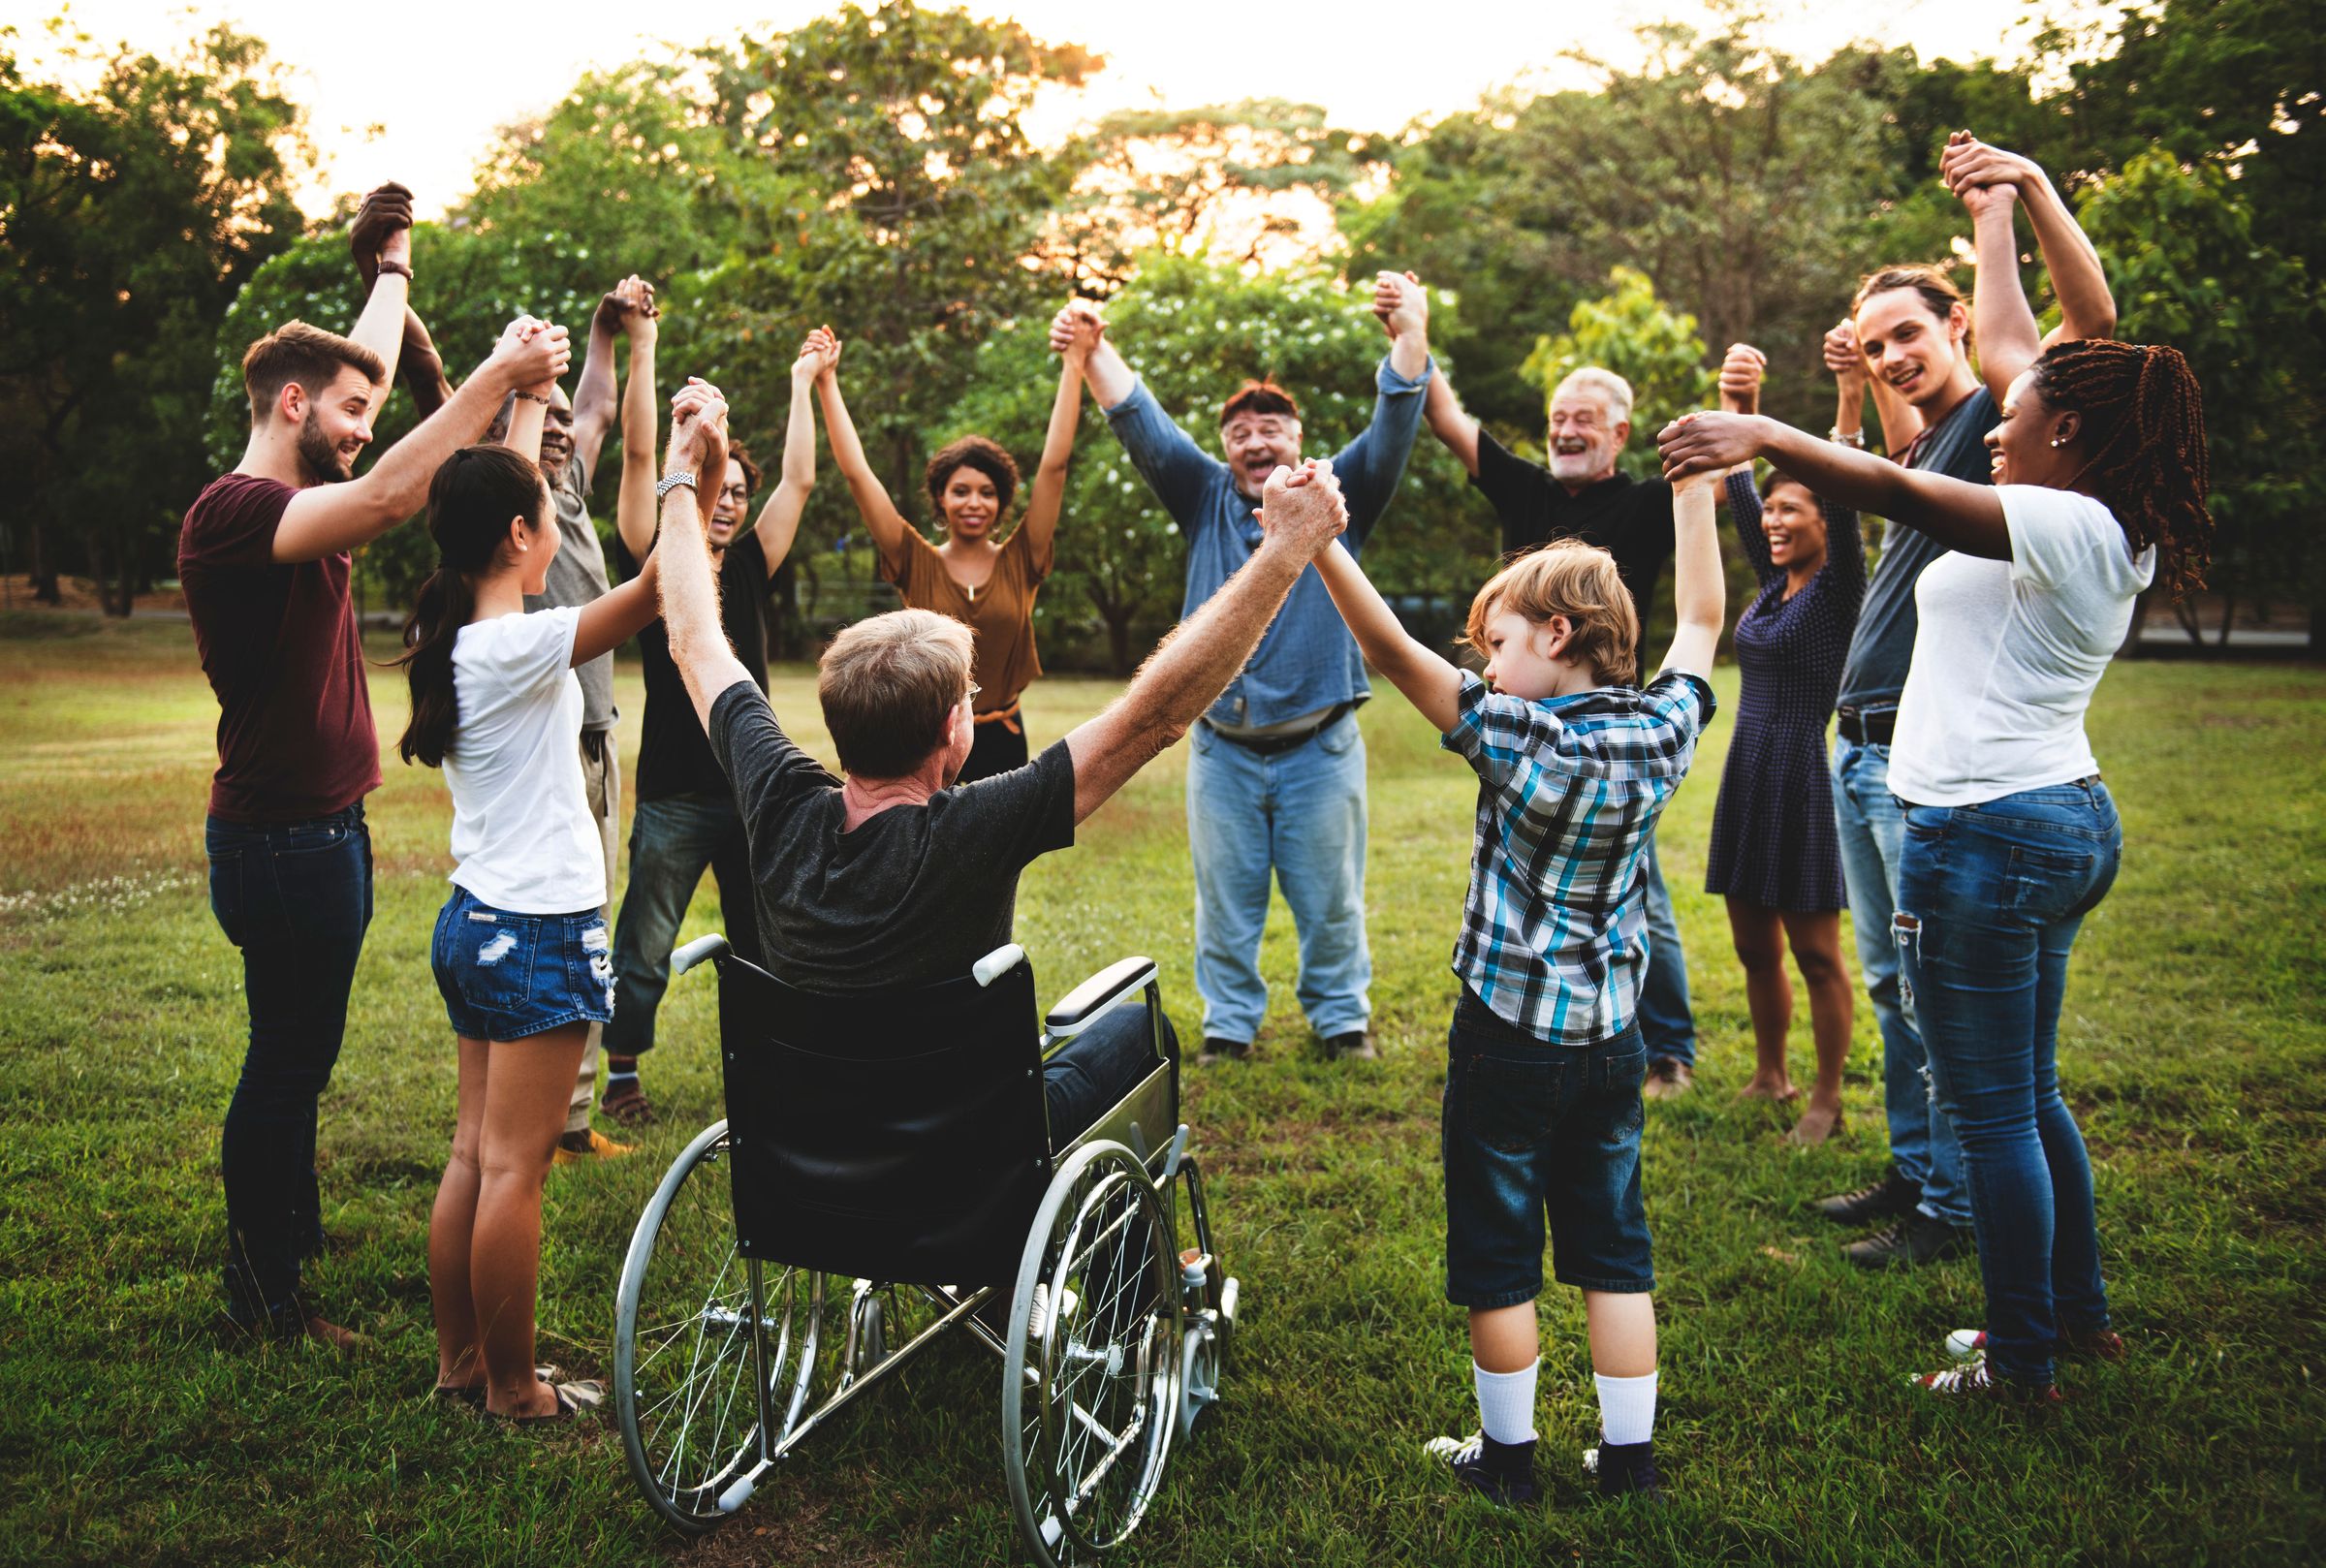 Group of different people all holding hands in a circle celebrating, what do they have in common? They all benefit from the peace of mind that comes from having an estate plan.